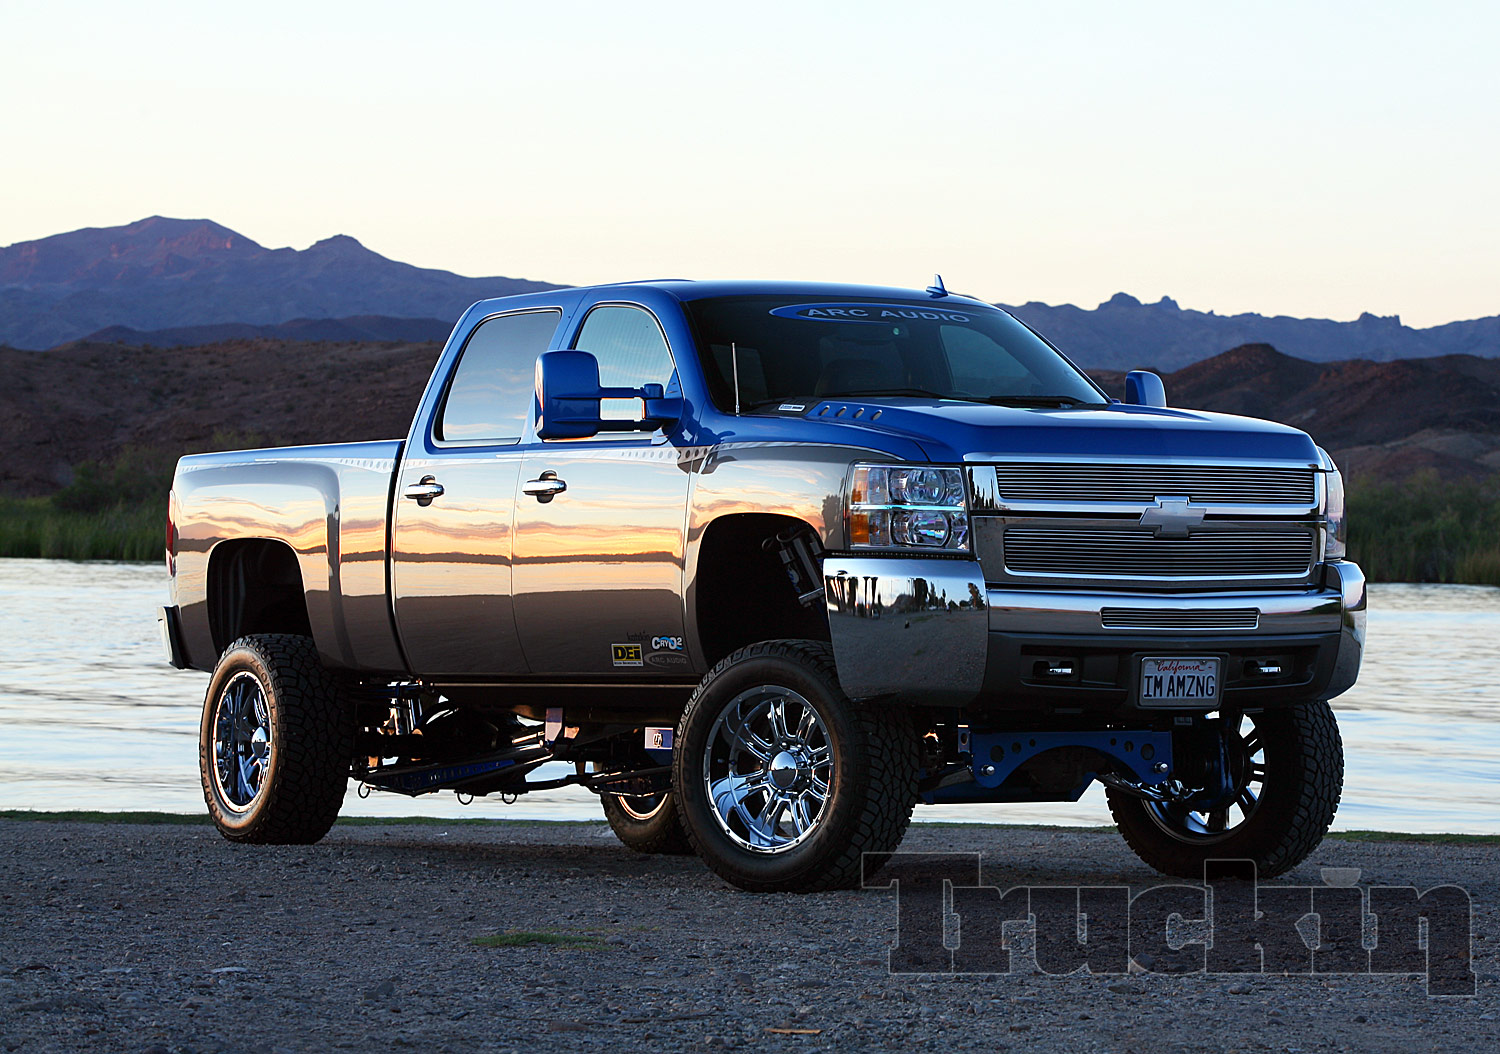 Free download Lifted Chevy Trucks Wallpaper [1500x1054] for your Desktop, Mobile & Tablet. Explore Chevy Trucks Wallpaper. Chevy Trucks Wallpaper, Chevy Trucks Wallpaper, Lifted Chevy Trucks Wallpaper